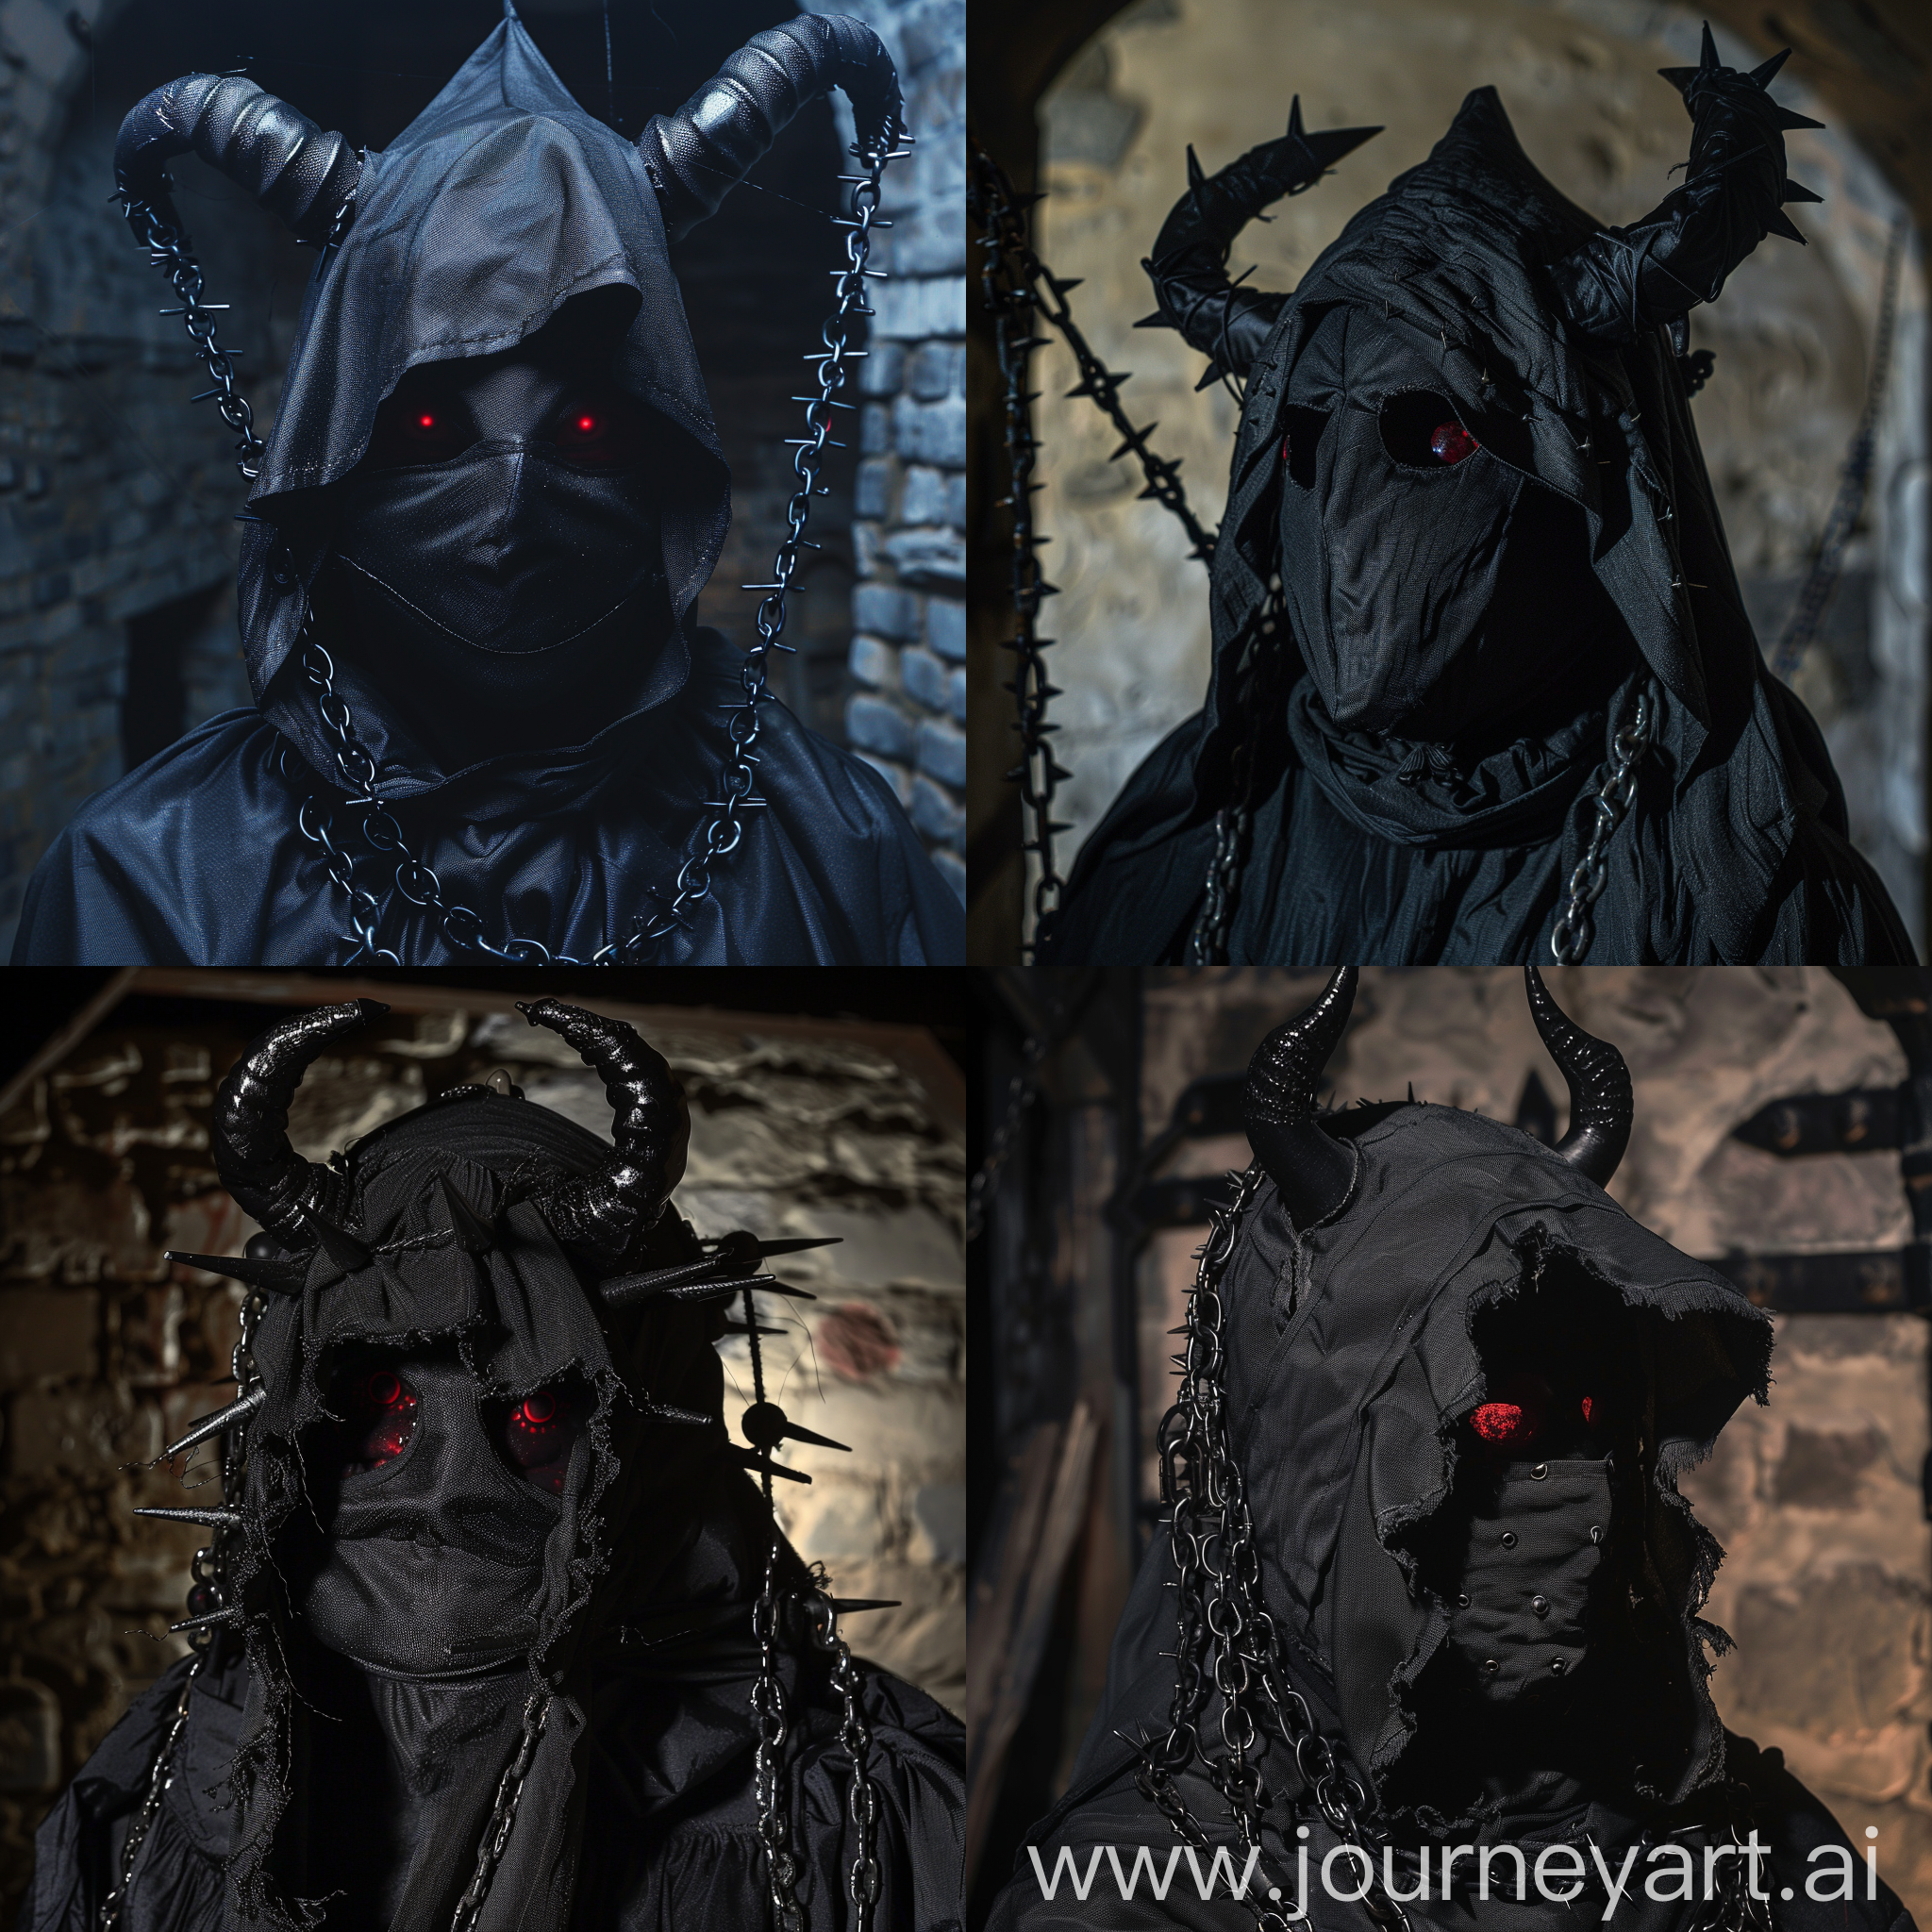 Plain black nylon faced creature with black horns, black fabric hood, red eyes, chained with spiked chains, at dark dungeon, dramatic lighting, caravaggio style